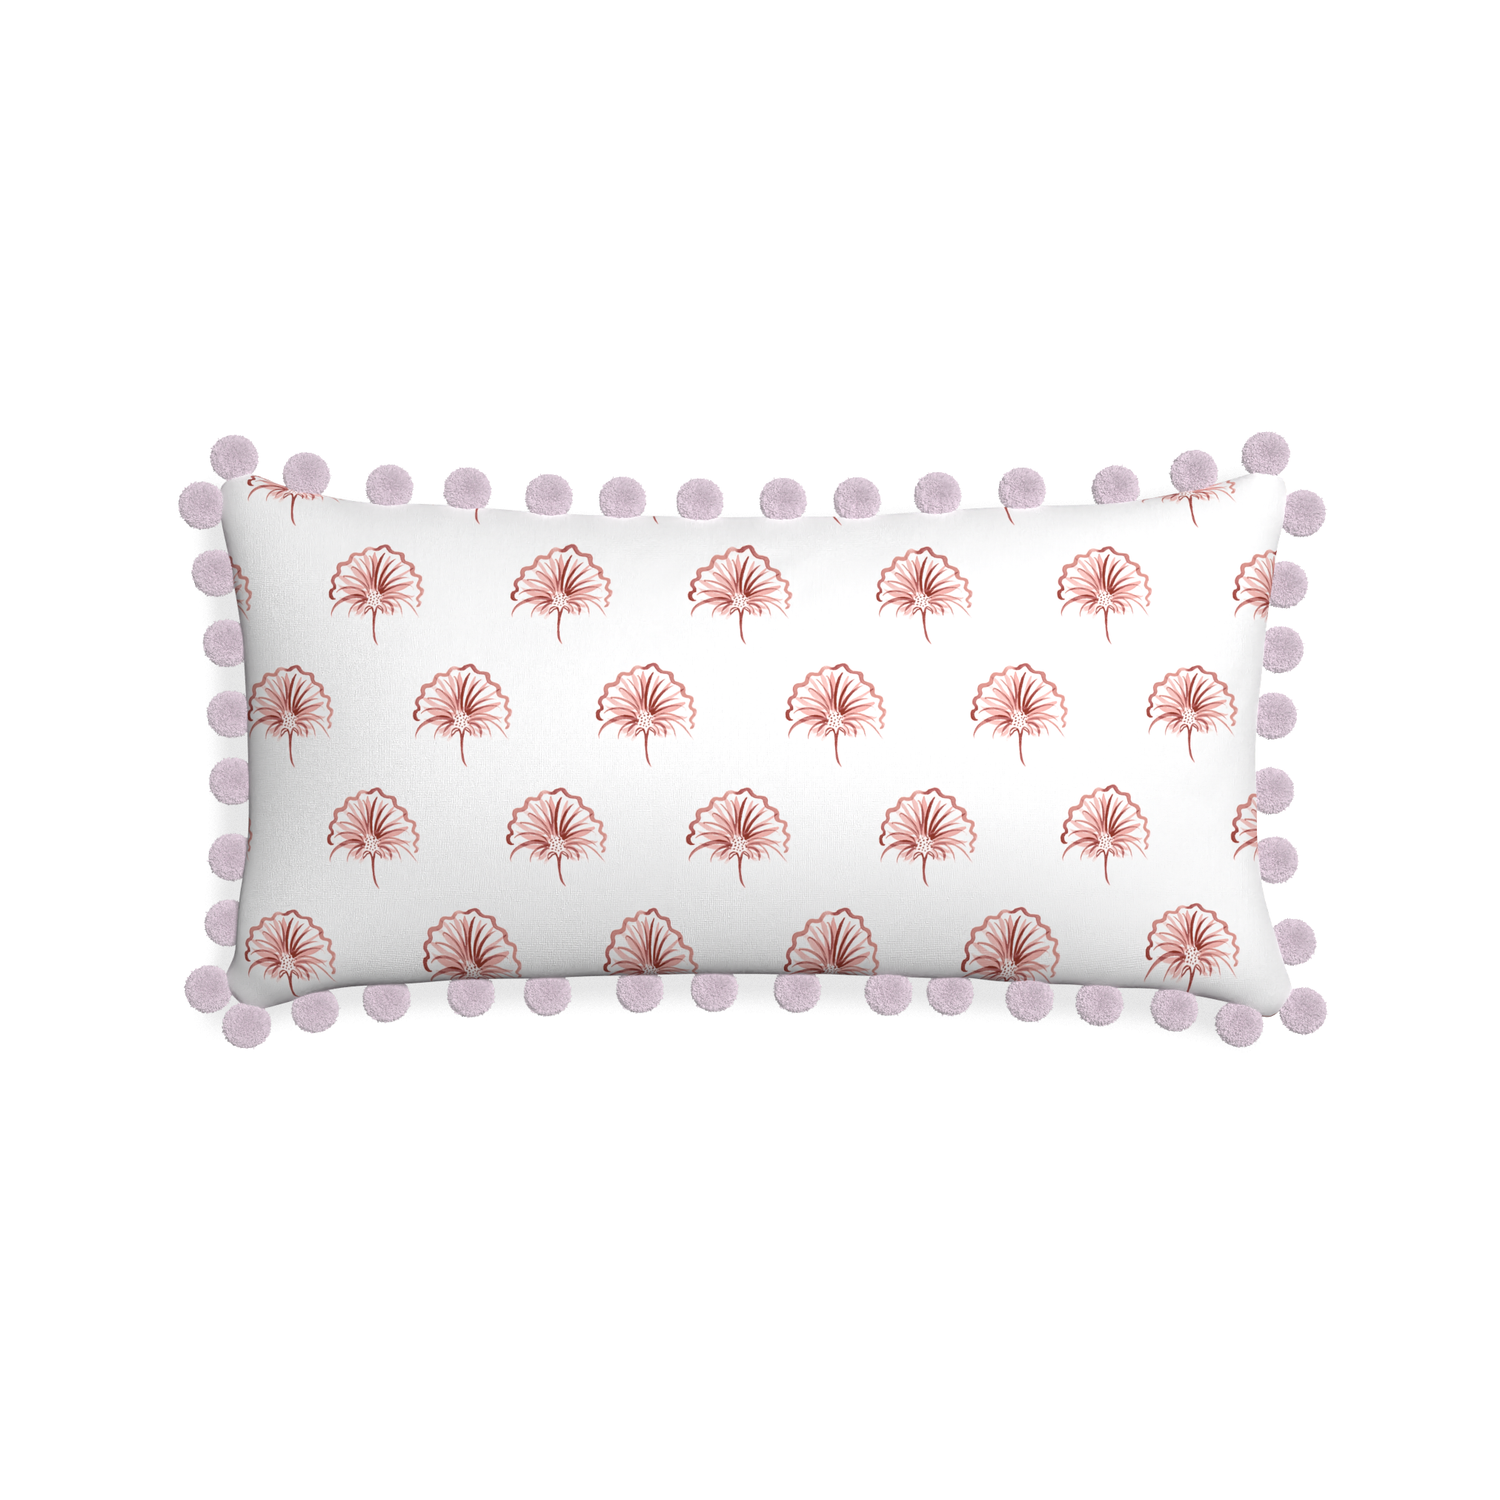 Midi-lumbar penelope rose custom floral pinkpillow with l on white background